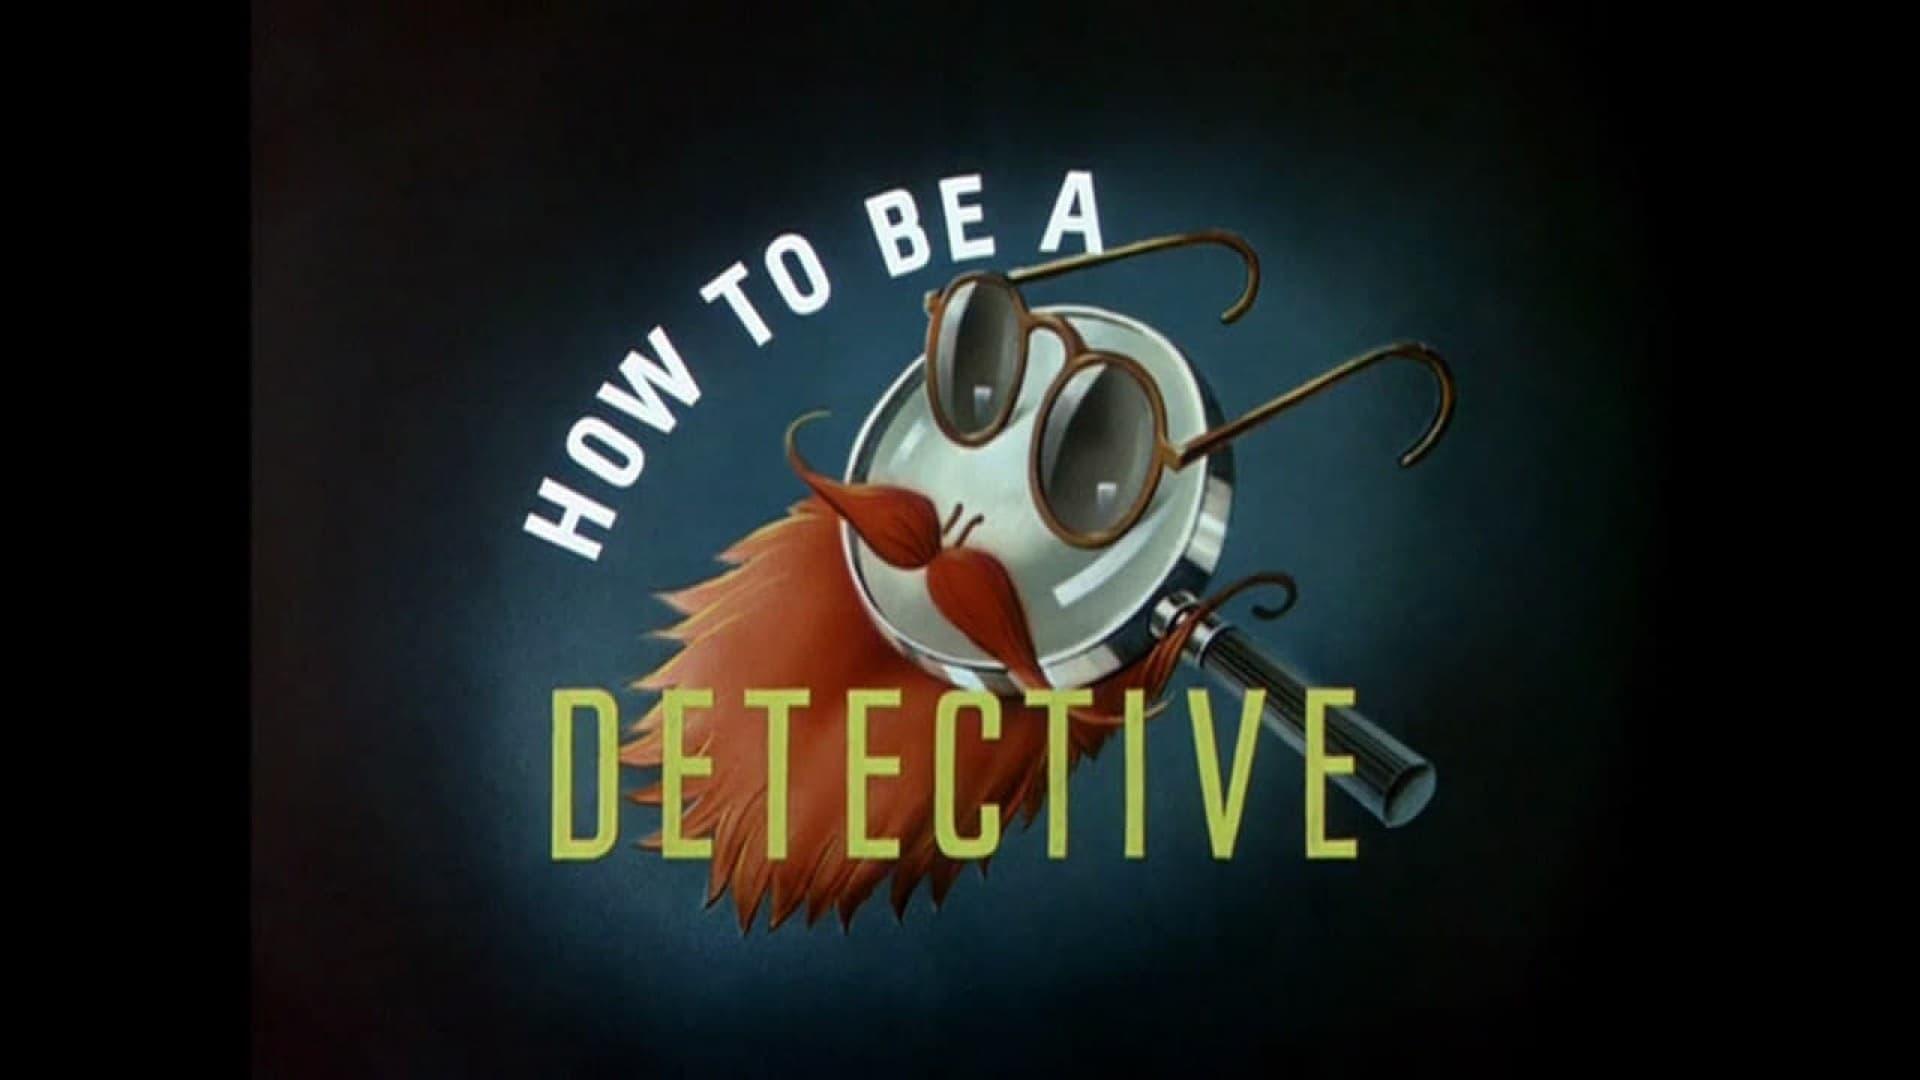 How to Be a Detective backdrop